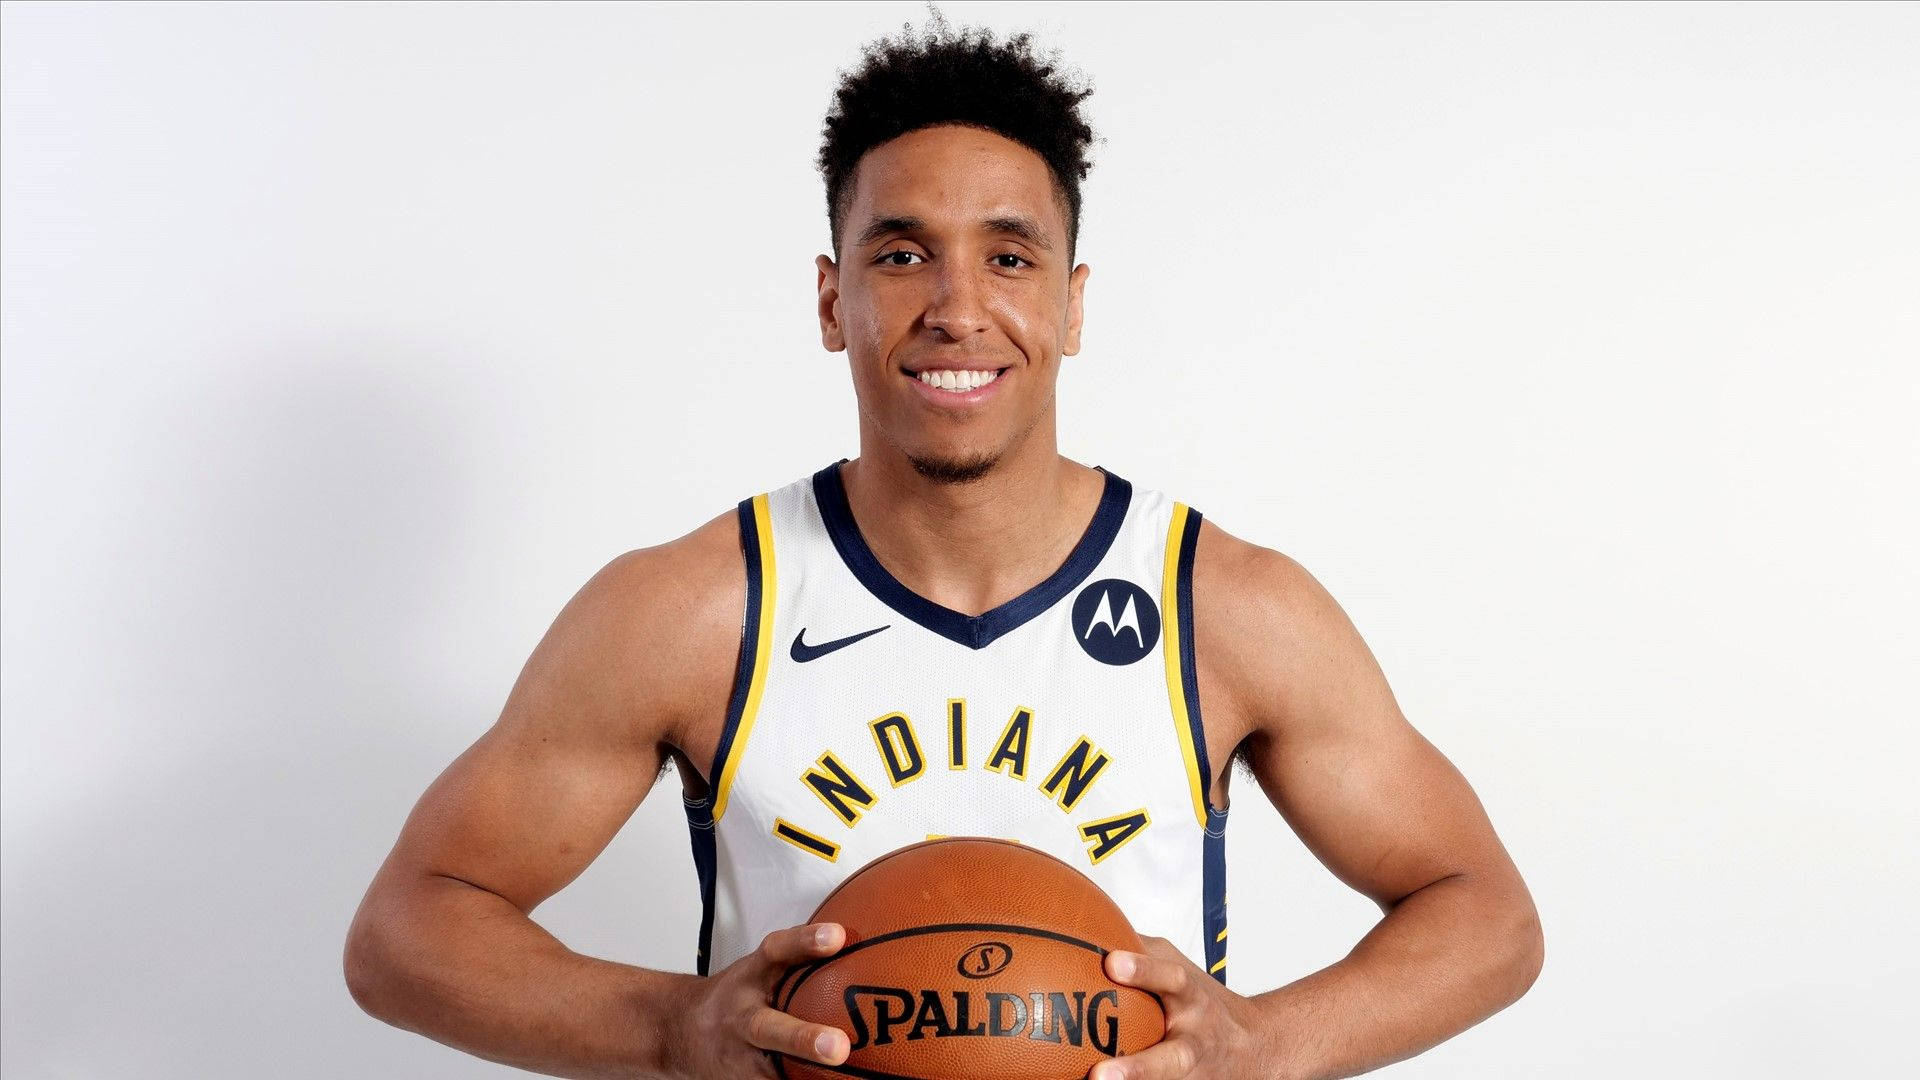 Caption: Nba Star Malcolm Brogdon In Action Background